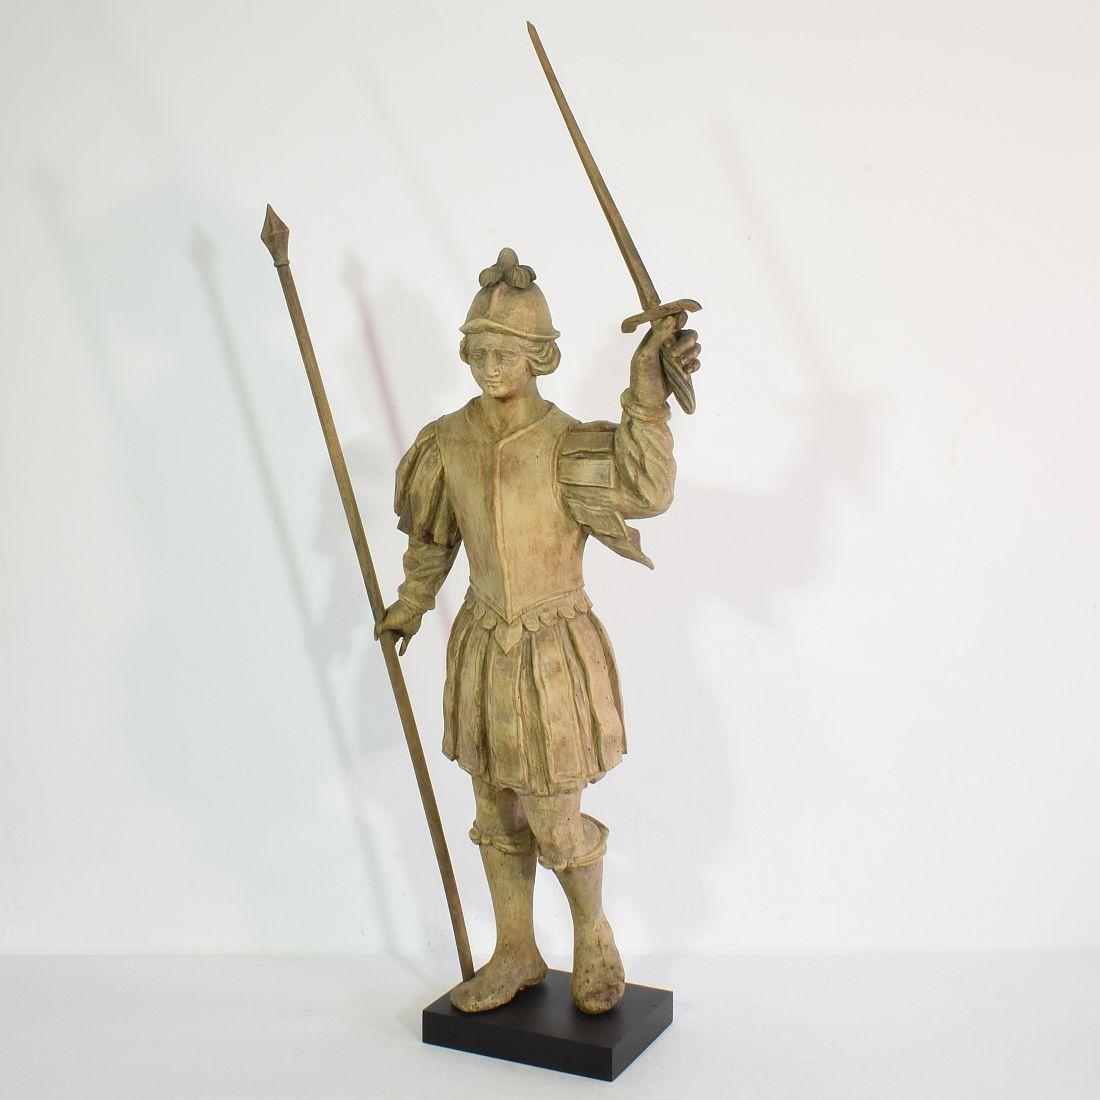 Wonderful baroque carved wooden armed figure. 
France, 17th-18th century. Weathered small losses and old repairs.
Measurement includes the sword and wooden base.